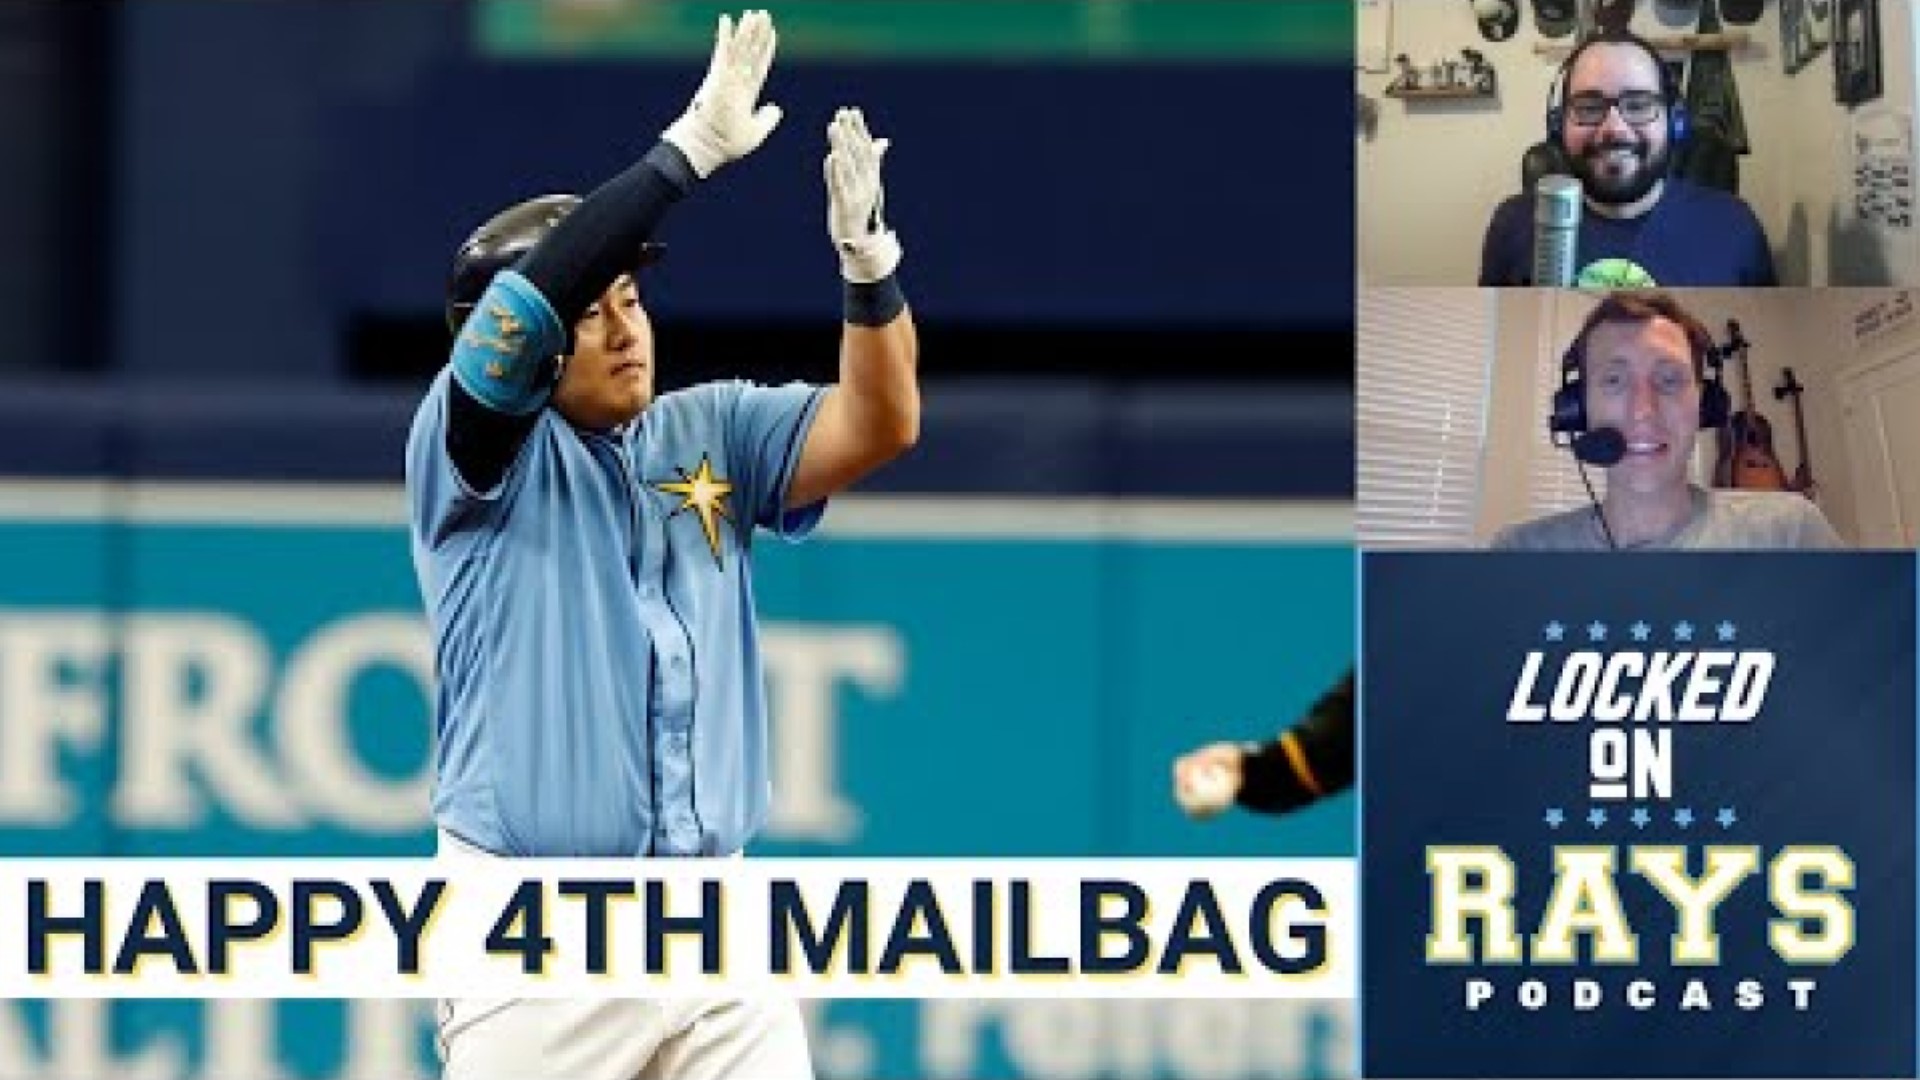 In this special Monday Mailbag, we have a few questions to answer that were recorded before the Rays offense exploded this weekend.